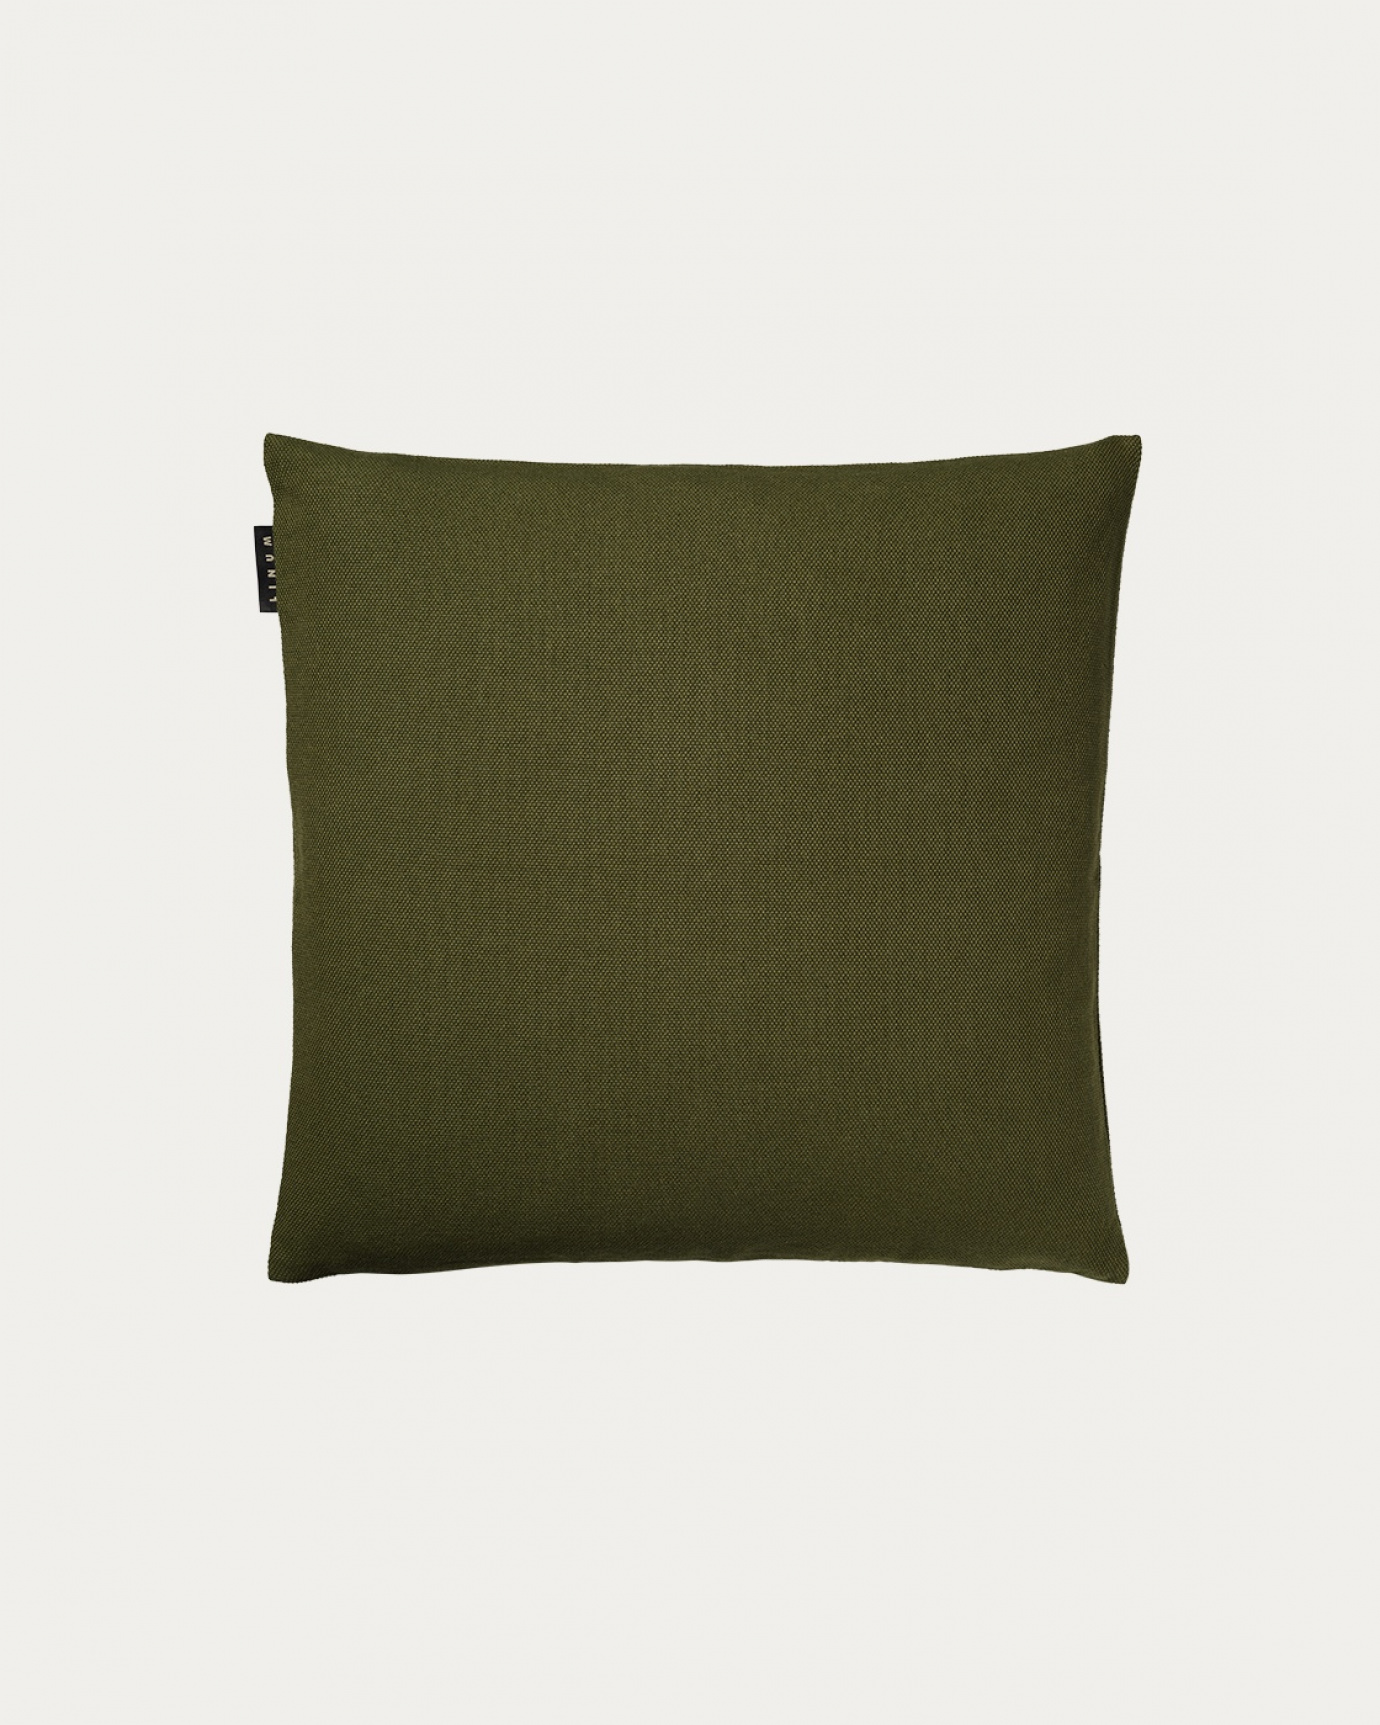 Product image dark olive green PEPPER cushion cover made of soft cotton from LINUM DESIGN. Easy to wash and durable for generations. Size 40x40 cm.